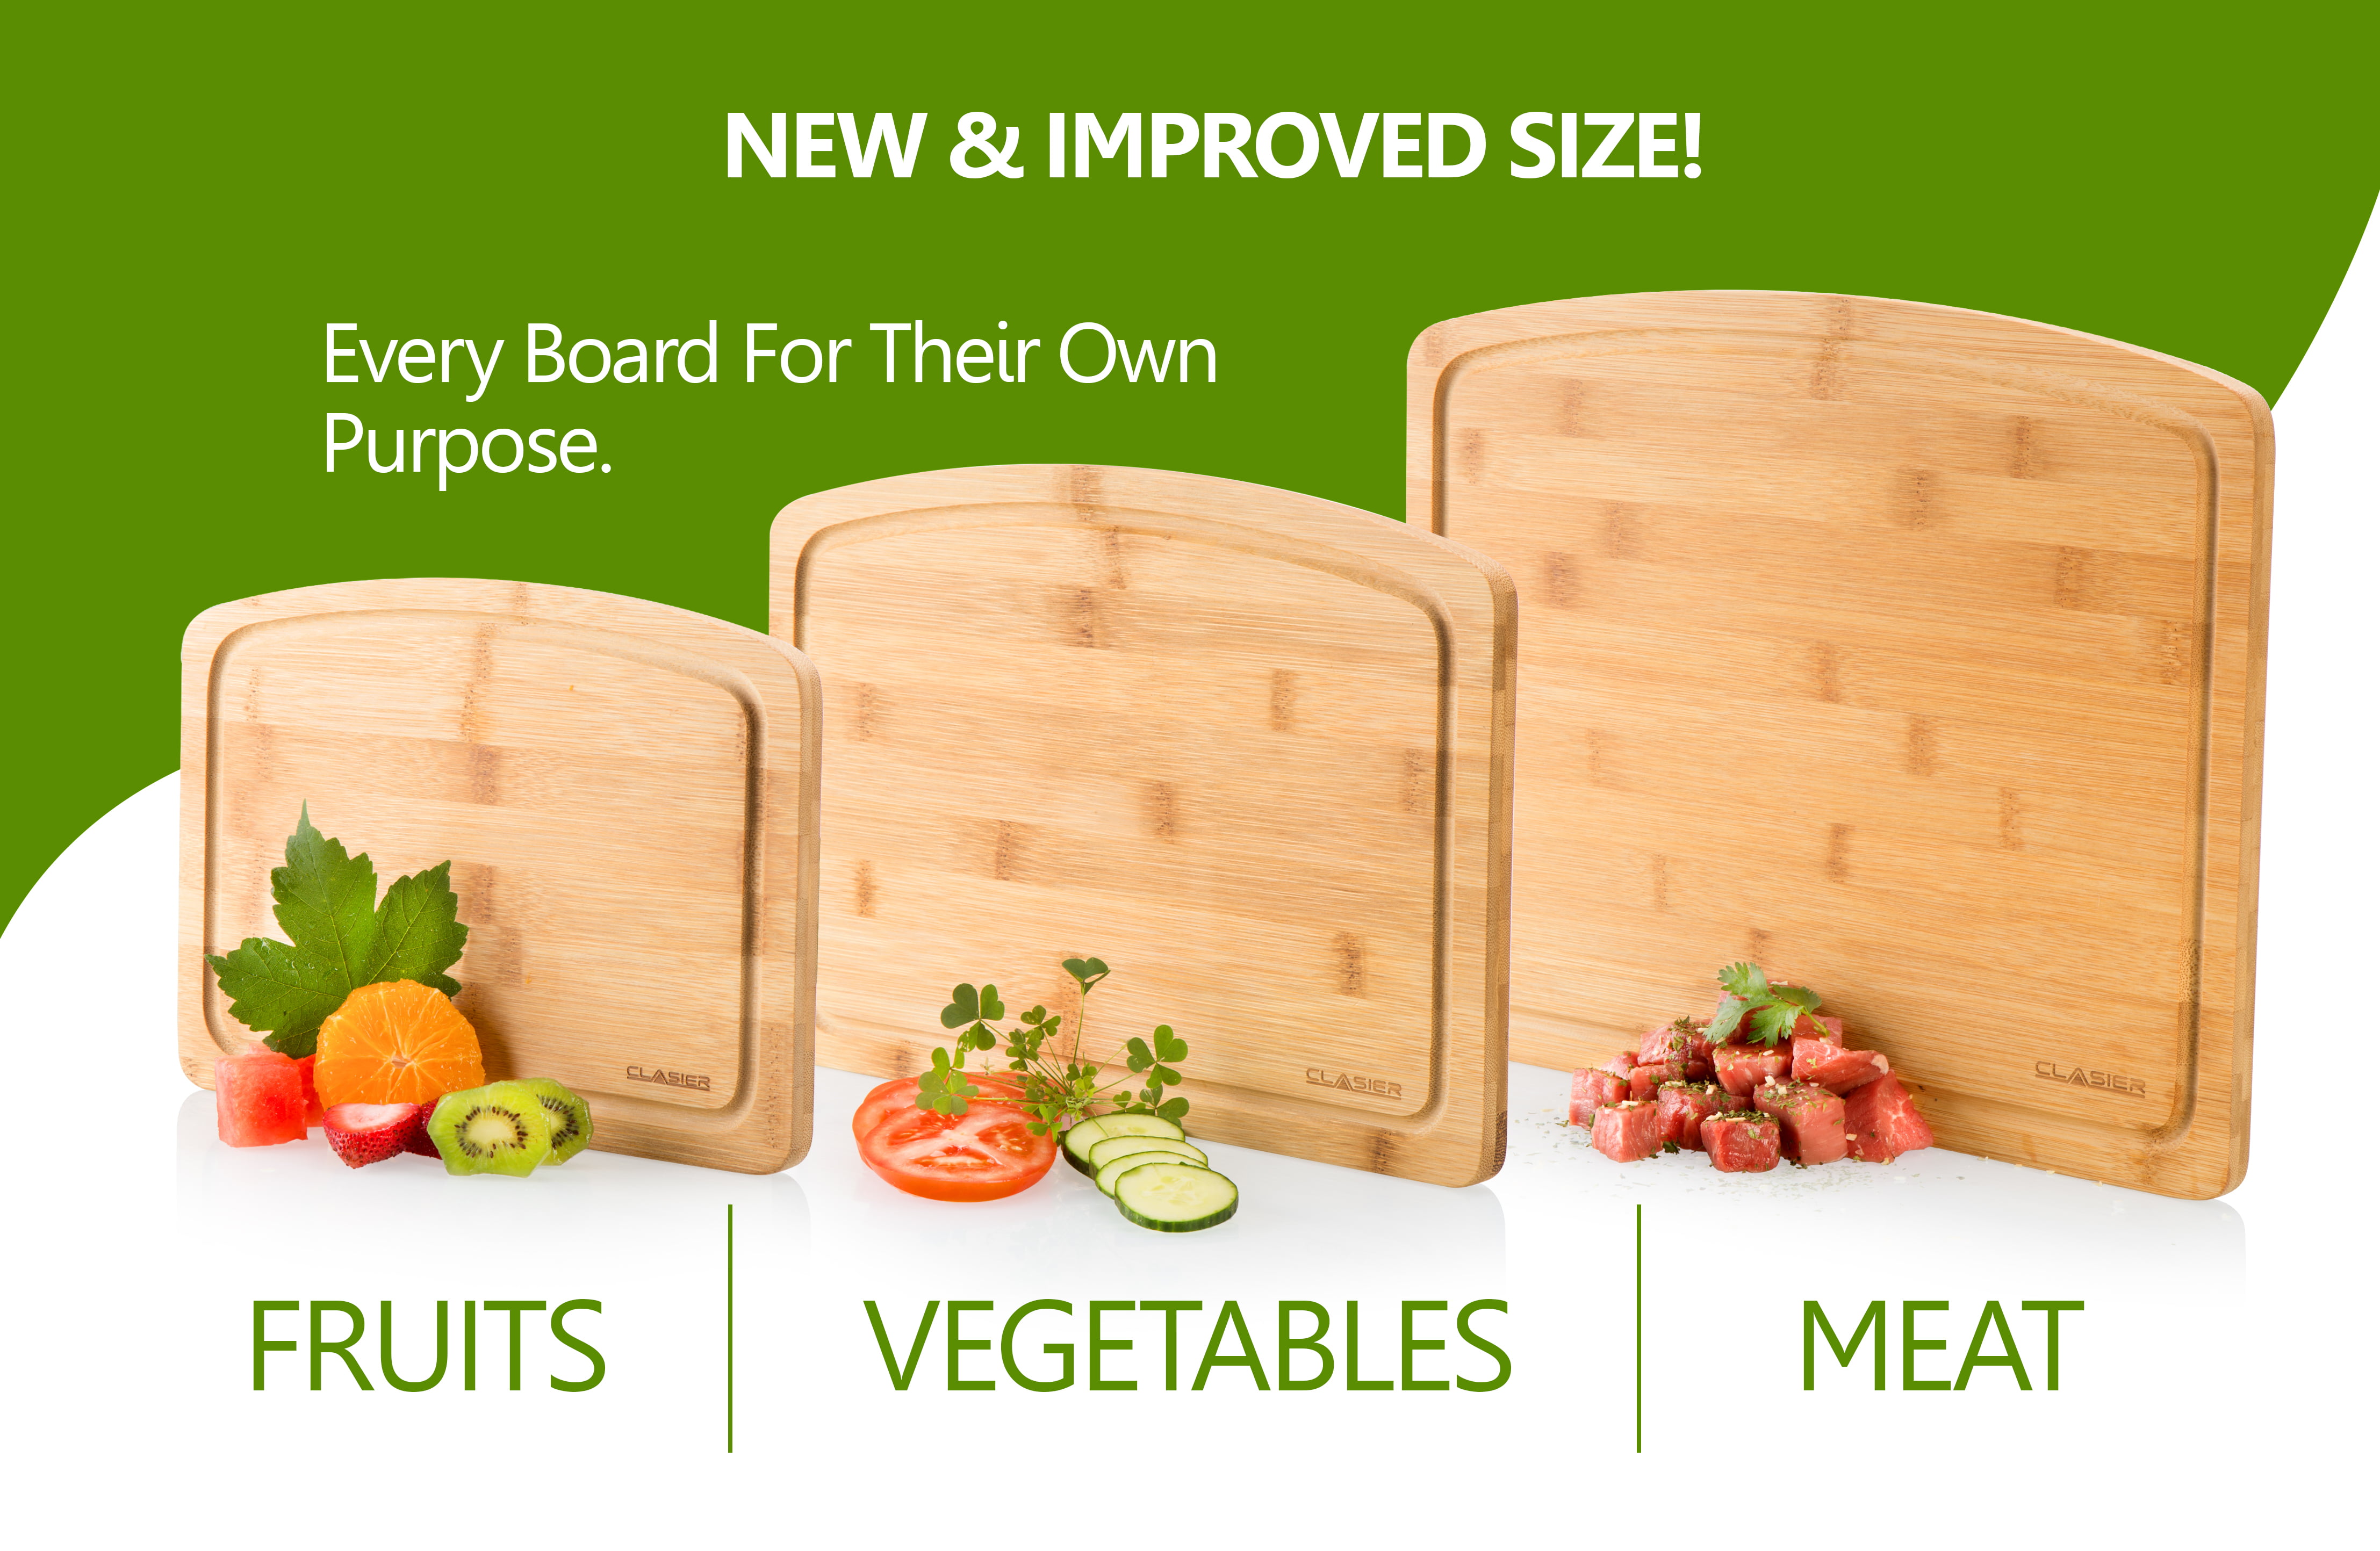 Easy-to-Clean Bamboo Wood Cutting Board with set of 6 Color-Coded Flex –  Cooler Kitchen